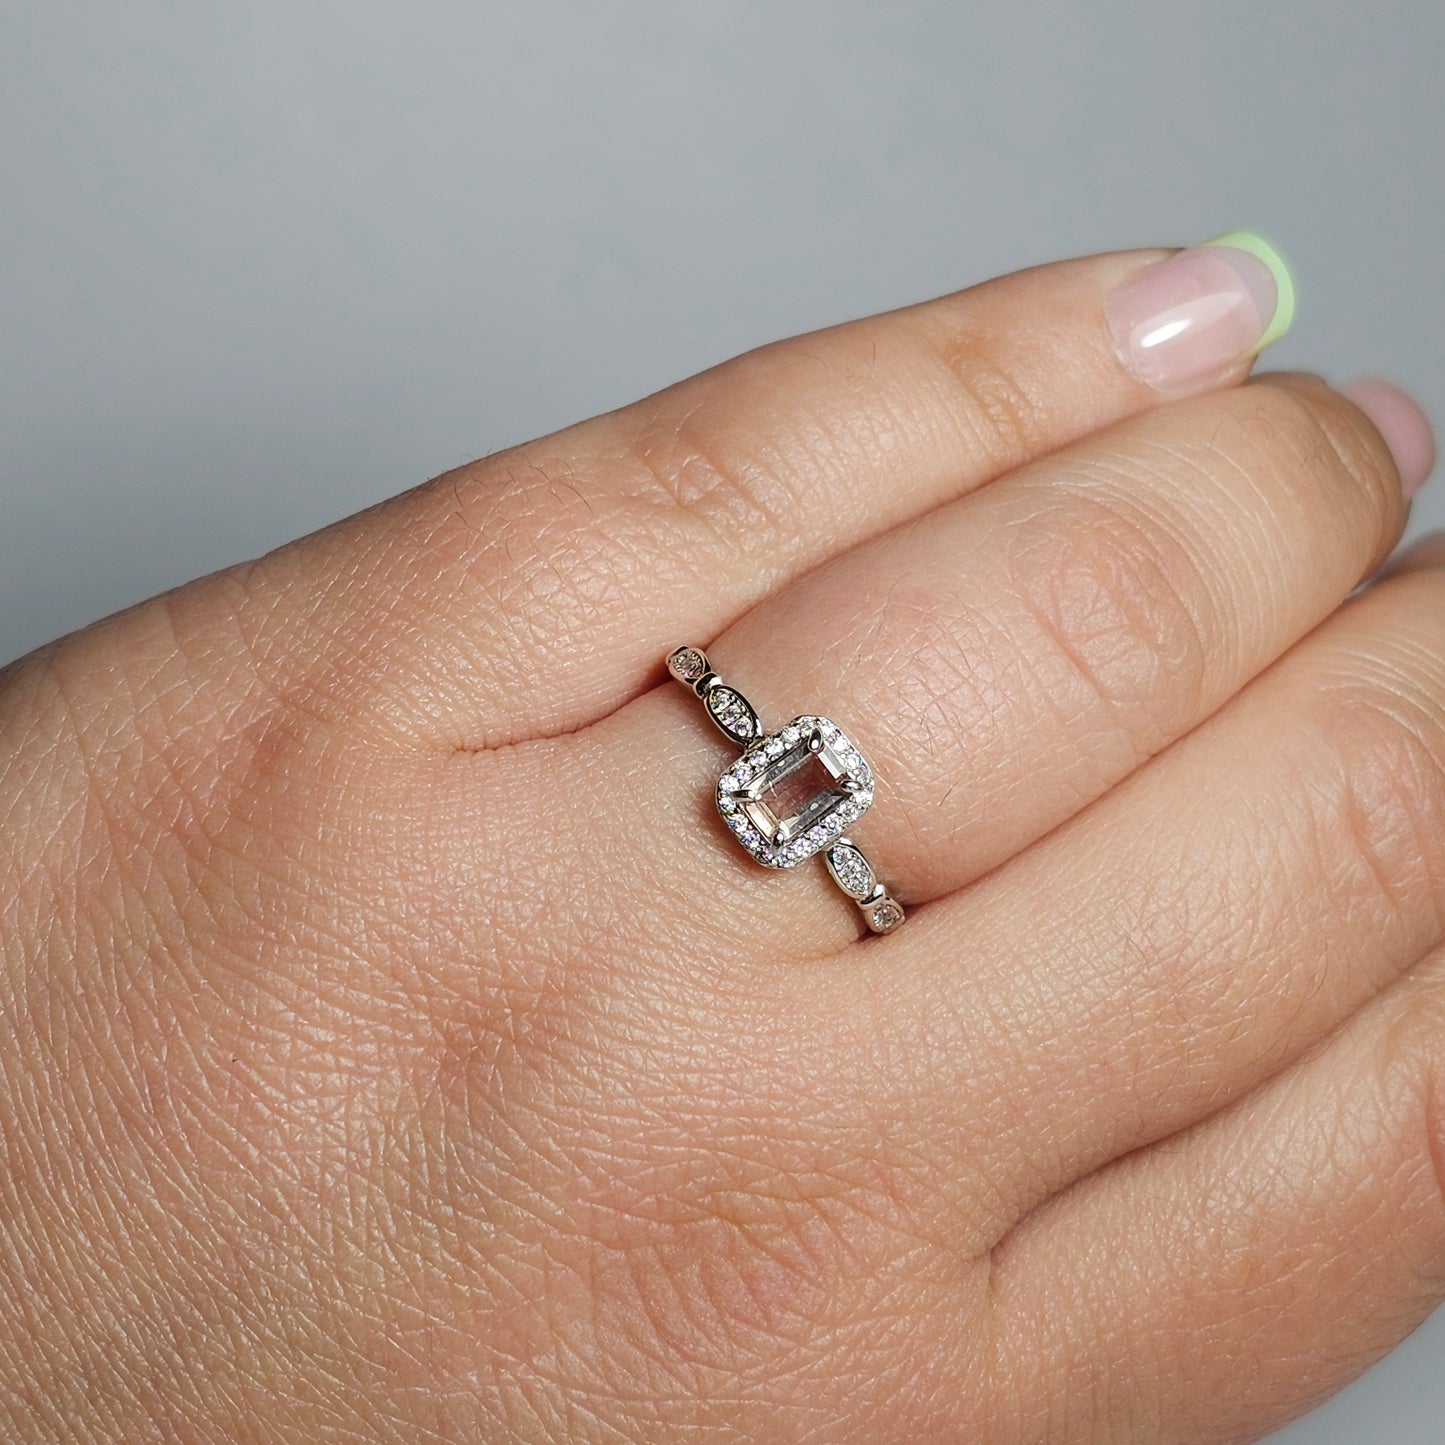 This petite adjustable ring is crafted from sterling silver and features a beautiful light pink Tourmaline baguette with a zircon accented crown and shoulders.